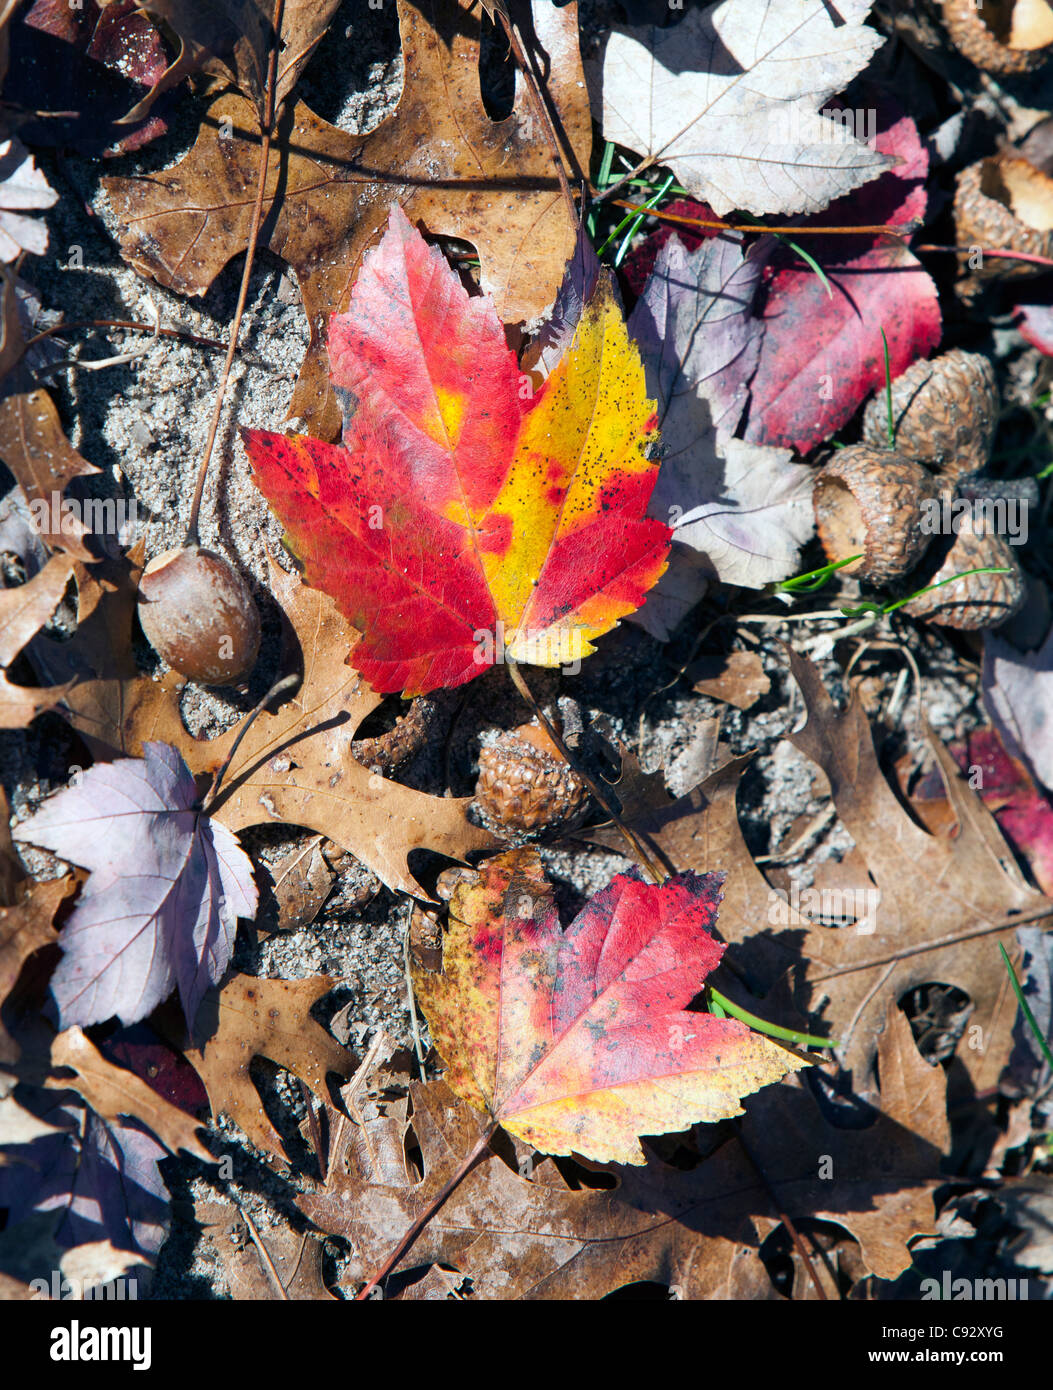 Colorful colourful Autumn maple leaves on the ground with acorns. Stock Photo